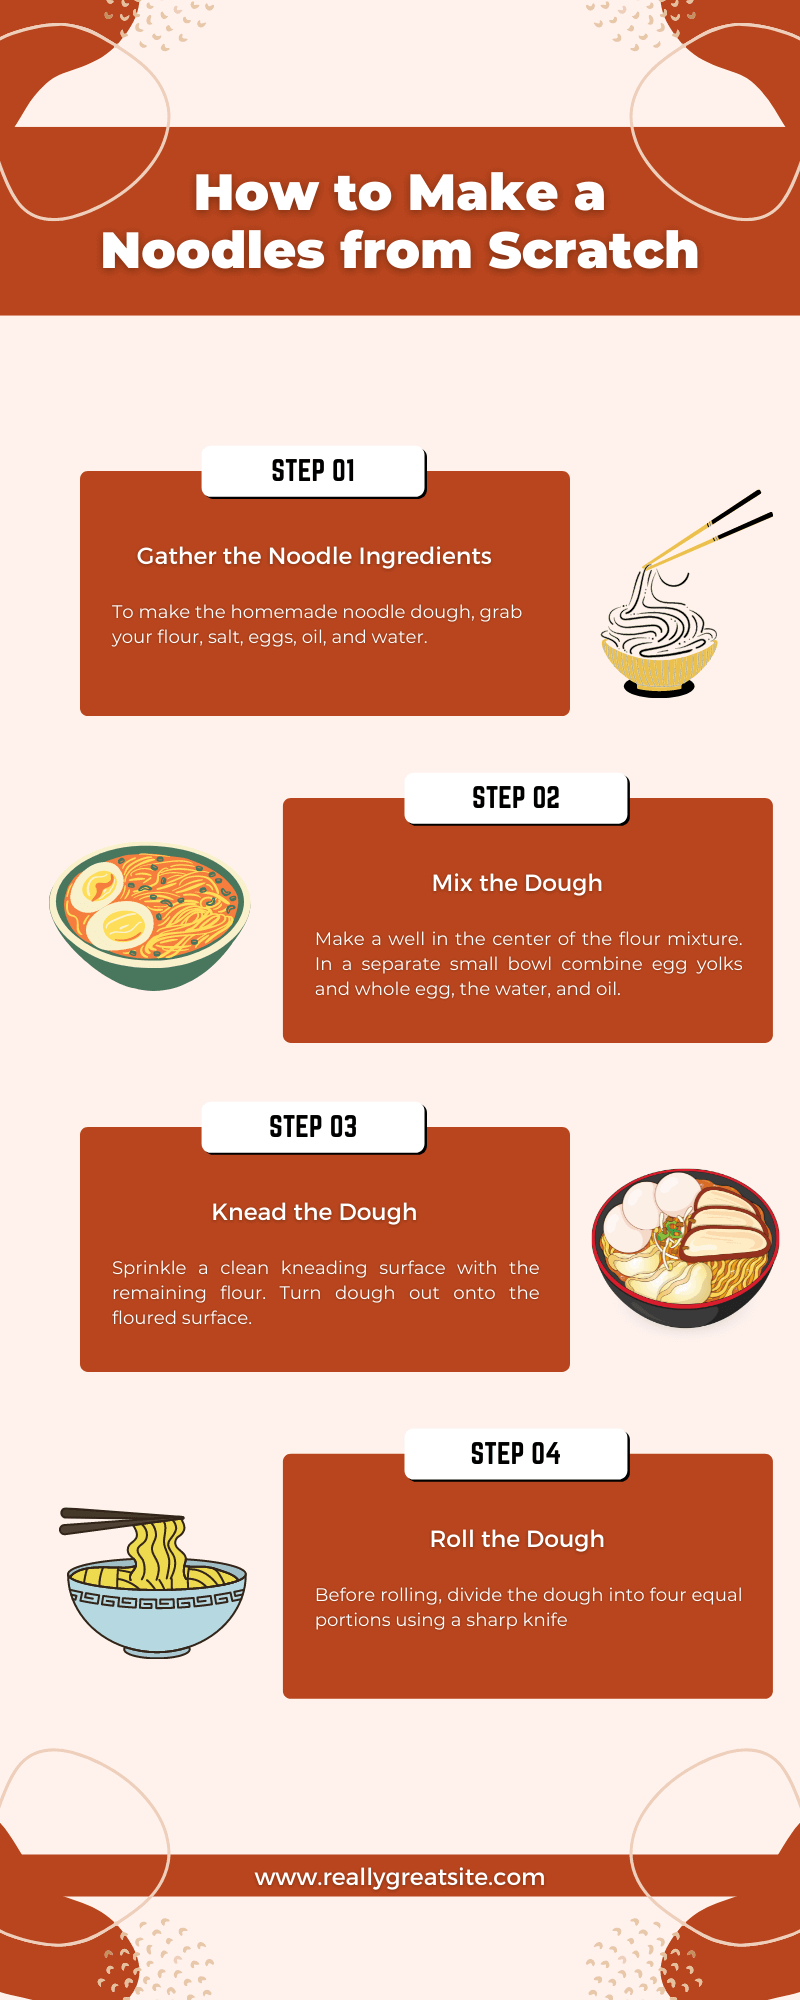 Cream & Brown Illustrated How To Make Infographic